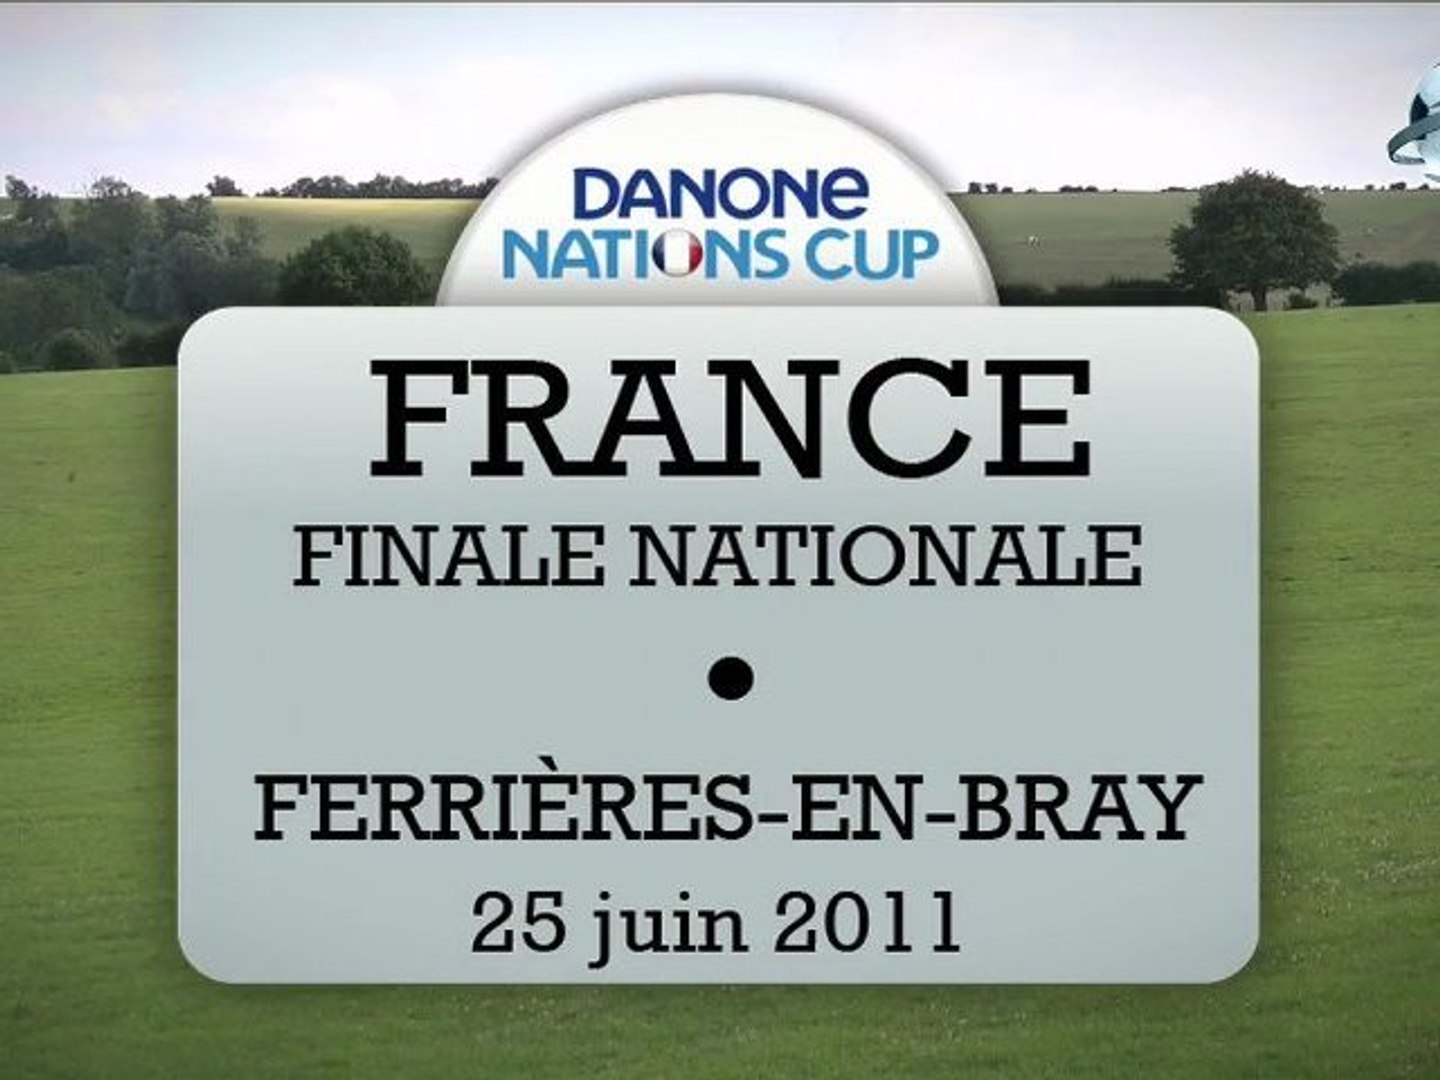 Danone Nations Cup National Final France - video Dailymotion